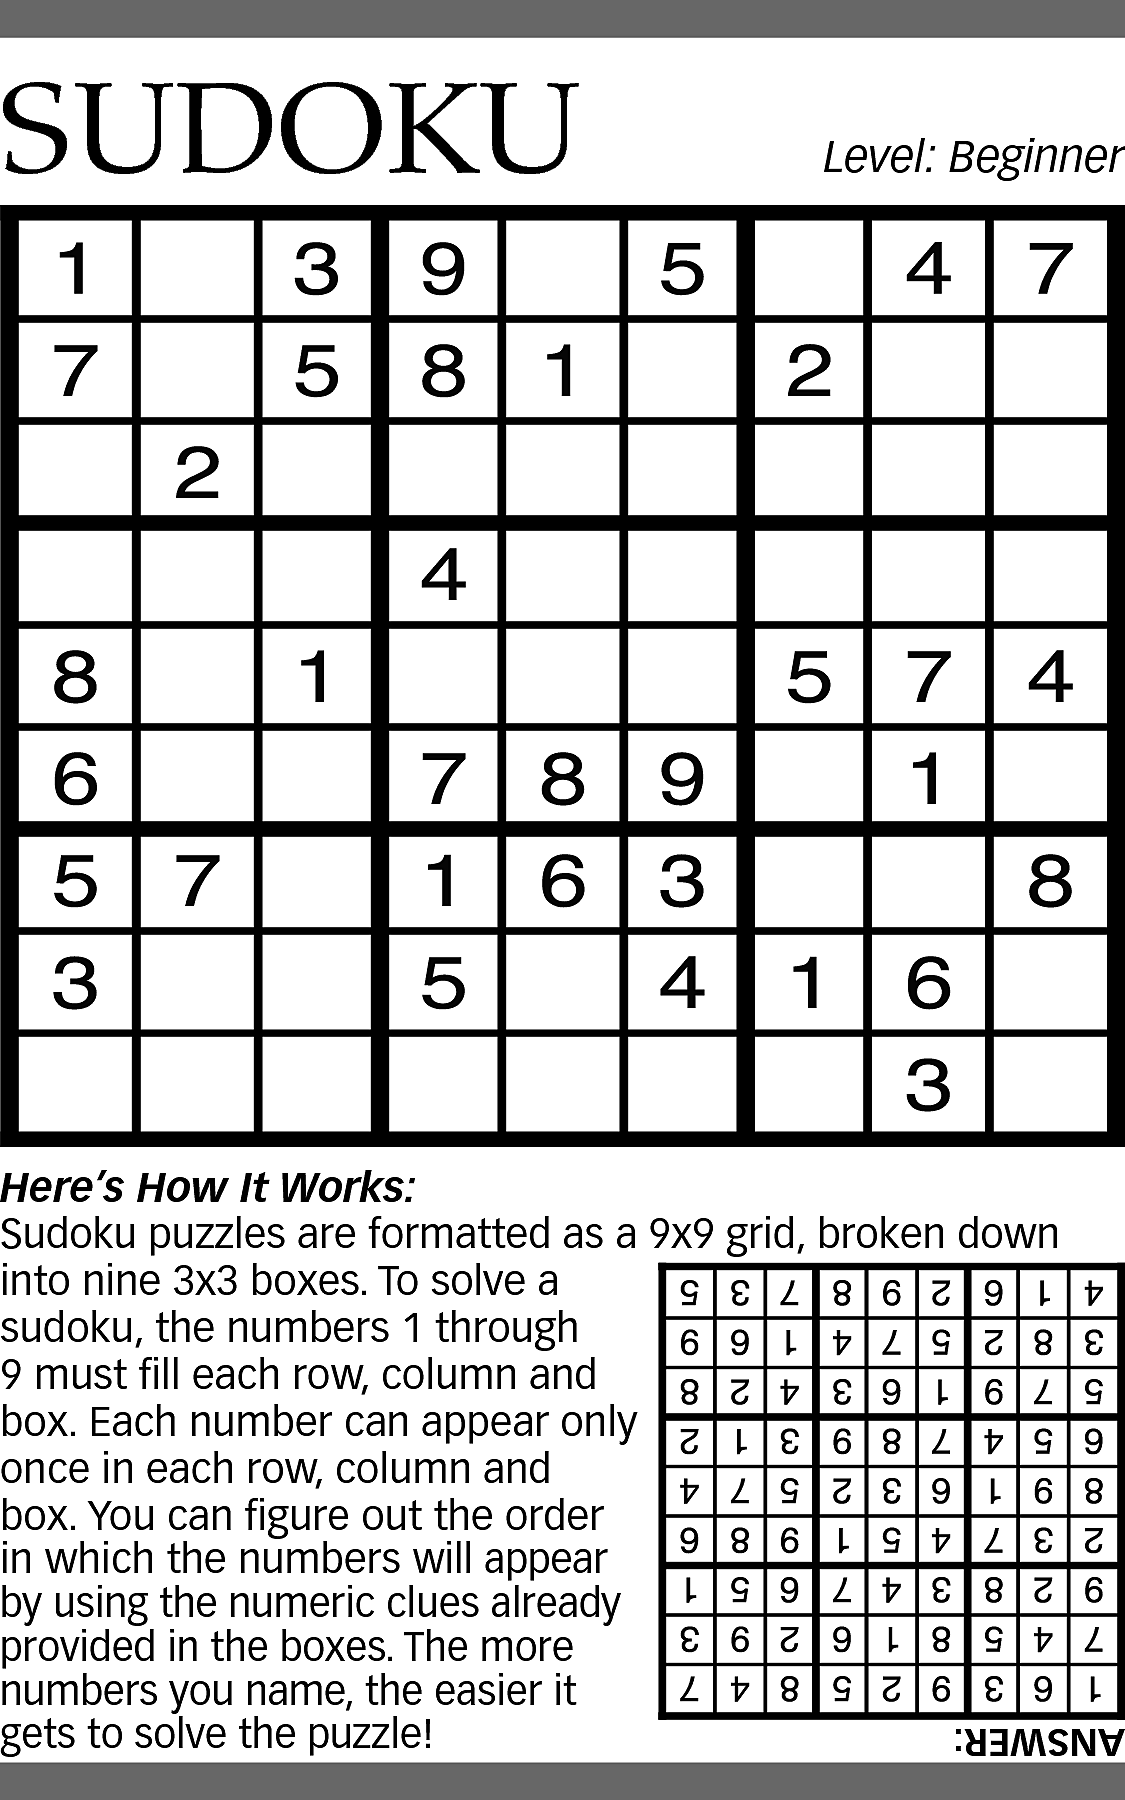 SUDOKU <br> <br>Level: Beginner <br>  SUDOKU    Level: Beginner    Here’s How It Works:  Sudoku puzzles are formatted as a 9x9 grid, broken down  into nine 3x3 boxes. To solve a  sudoku, the numbers 1 through  9 must fill each row, column and  box. Each number can appear only  once in each row, column and  box. You can figure out the order  in which the numbers will appear  by using the numeric clues already  provided in the boxes. The more  numbers you name, the easier it  gets to solve the puzzle!    ANSWER:    